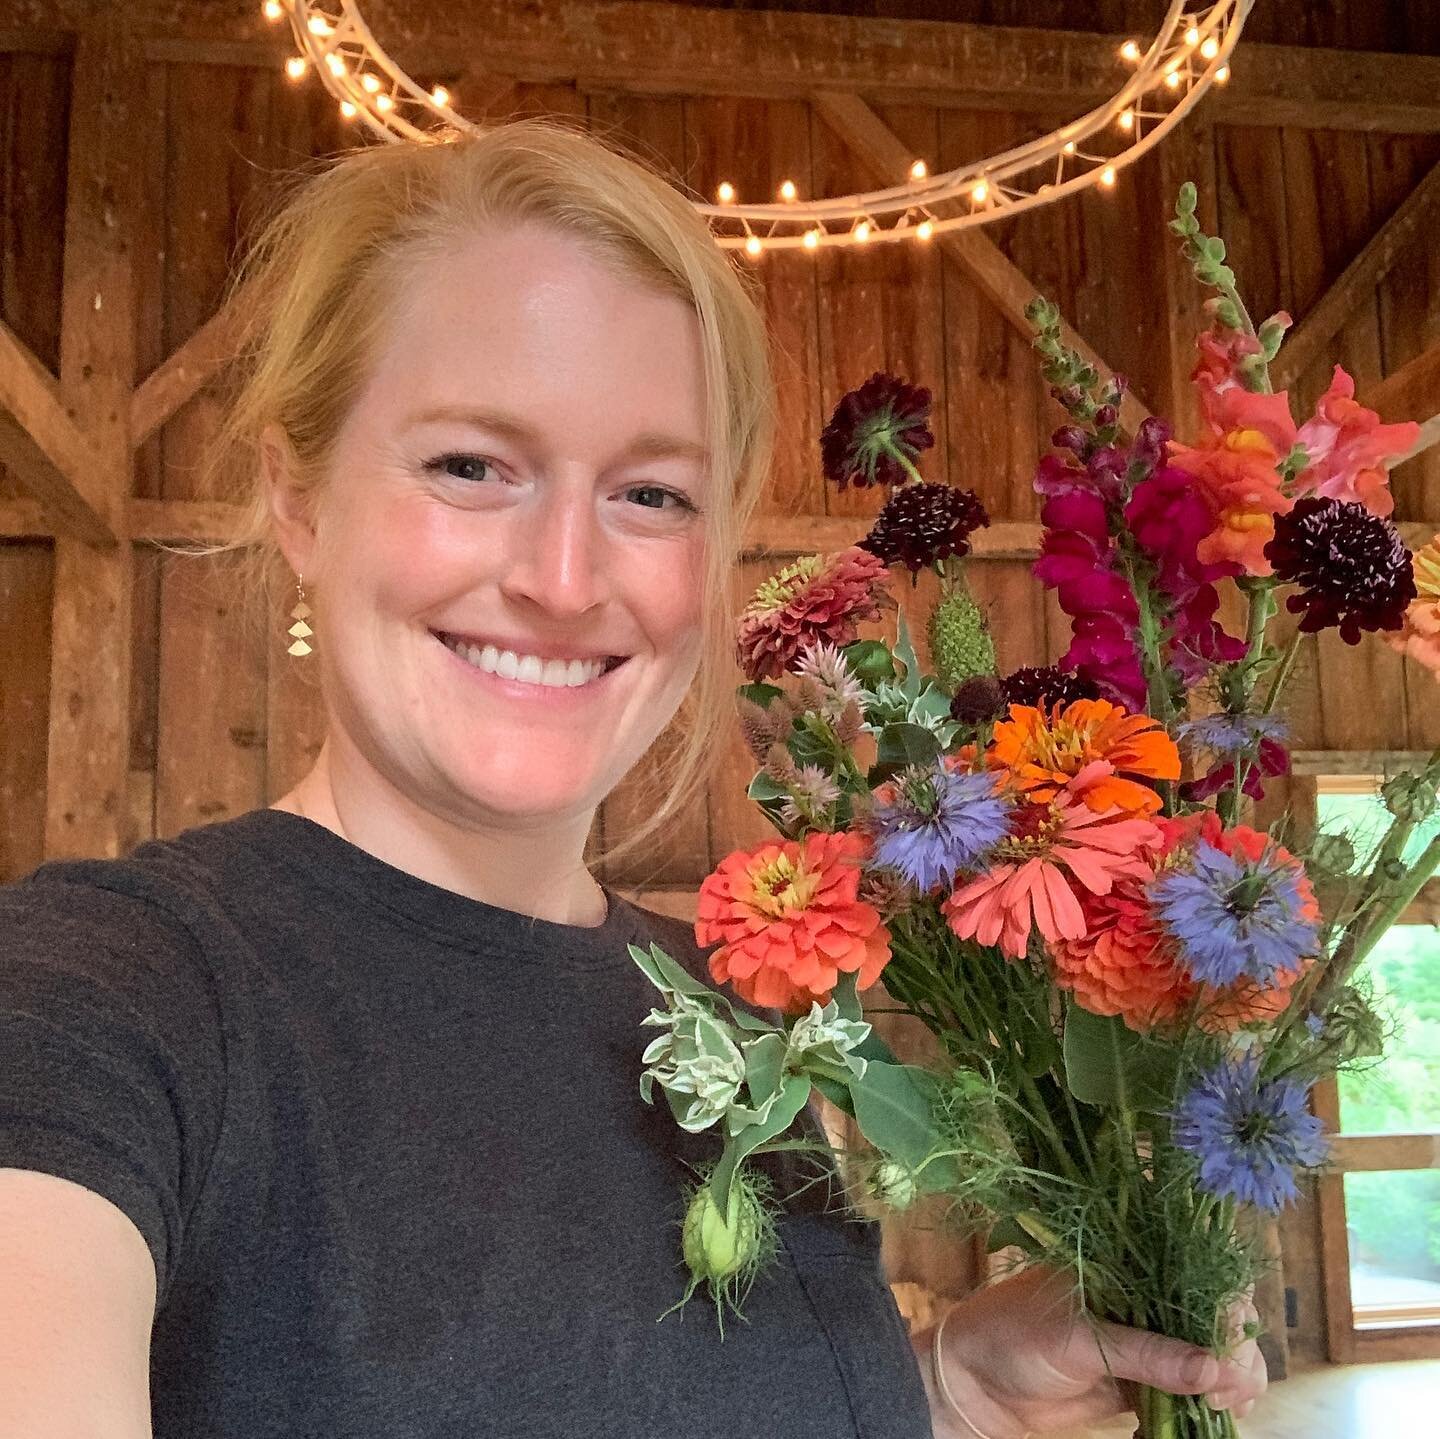 Hi! It&rsquo;s me. Kelsey. Owner / Farmer / Event Coordinator at Wanderwood! This is what I look like when I&rsquo;m clean and I&rsquo;ve had a good snack. :)

This is a post to remind myself (and you!) that it&rsquo;ll be summer soon. (Don&rsquo;t @